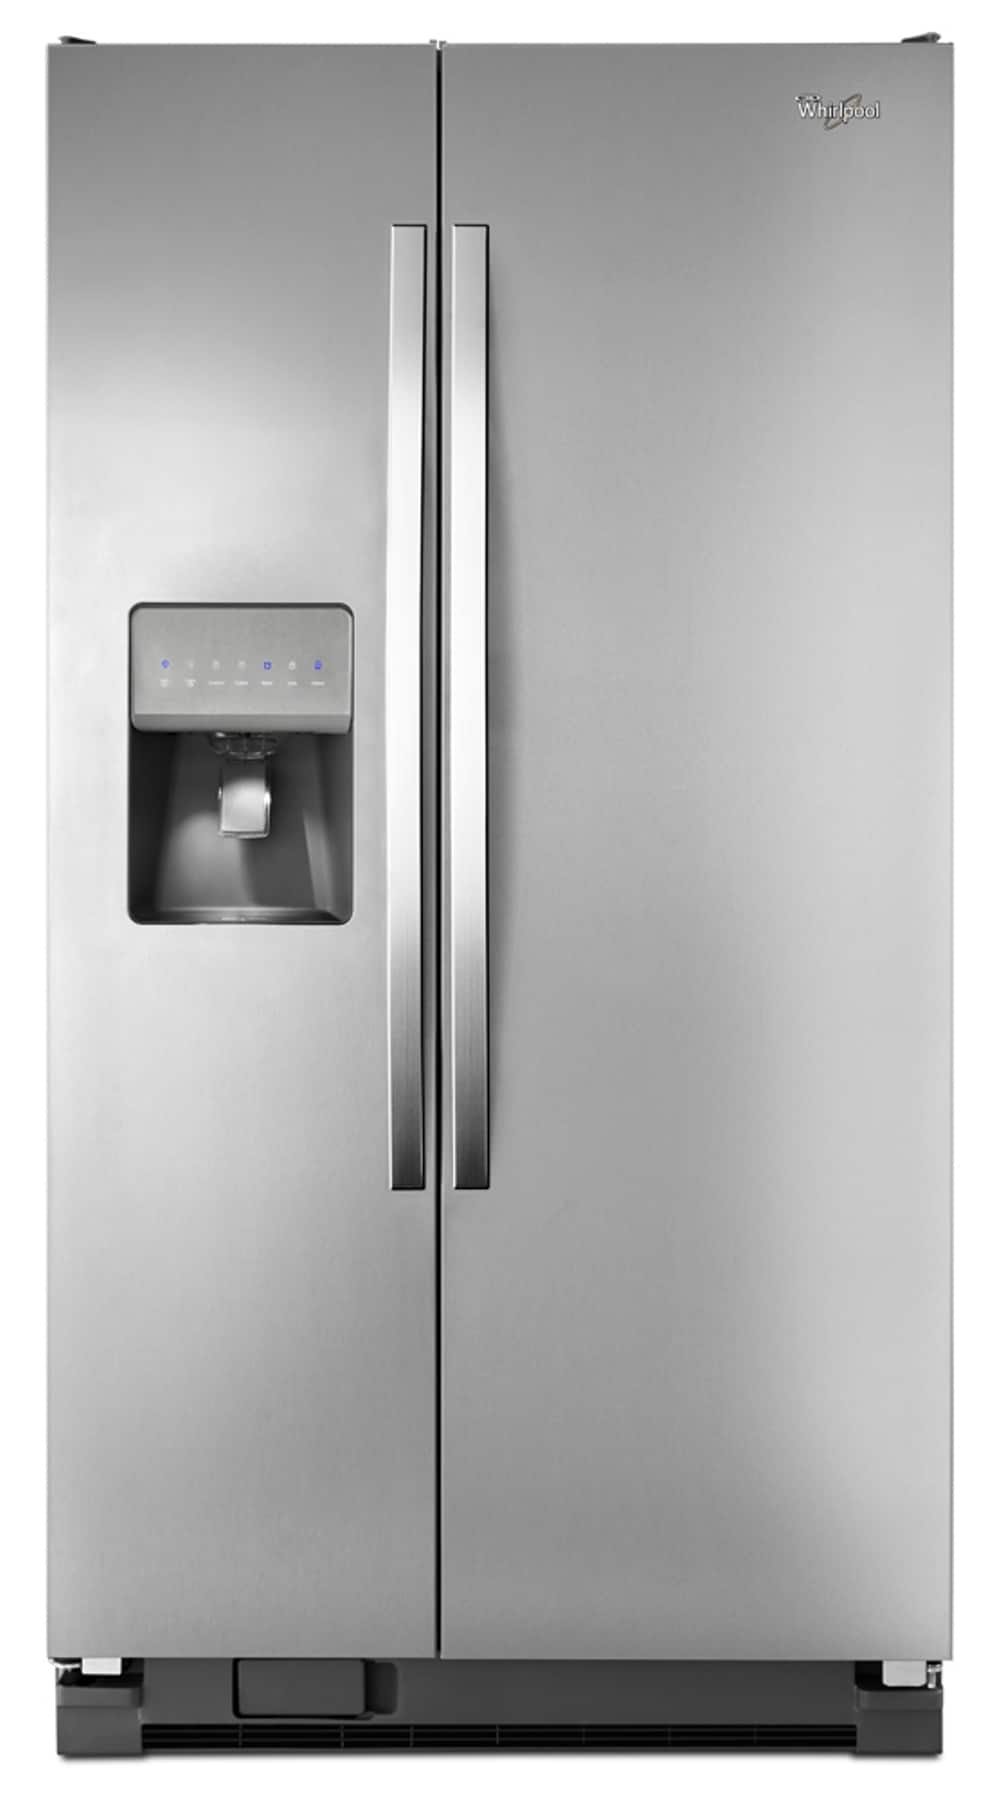 Whirlpool WHREFR1 Side-by-Side Column Refrigerator & Freezer Set with 30  Inch Freezer and 30 Inch Refrigerator in Stainless Steel